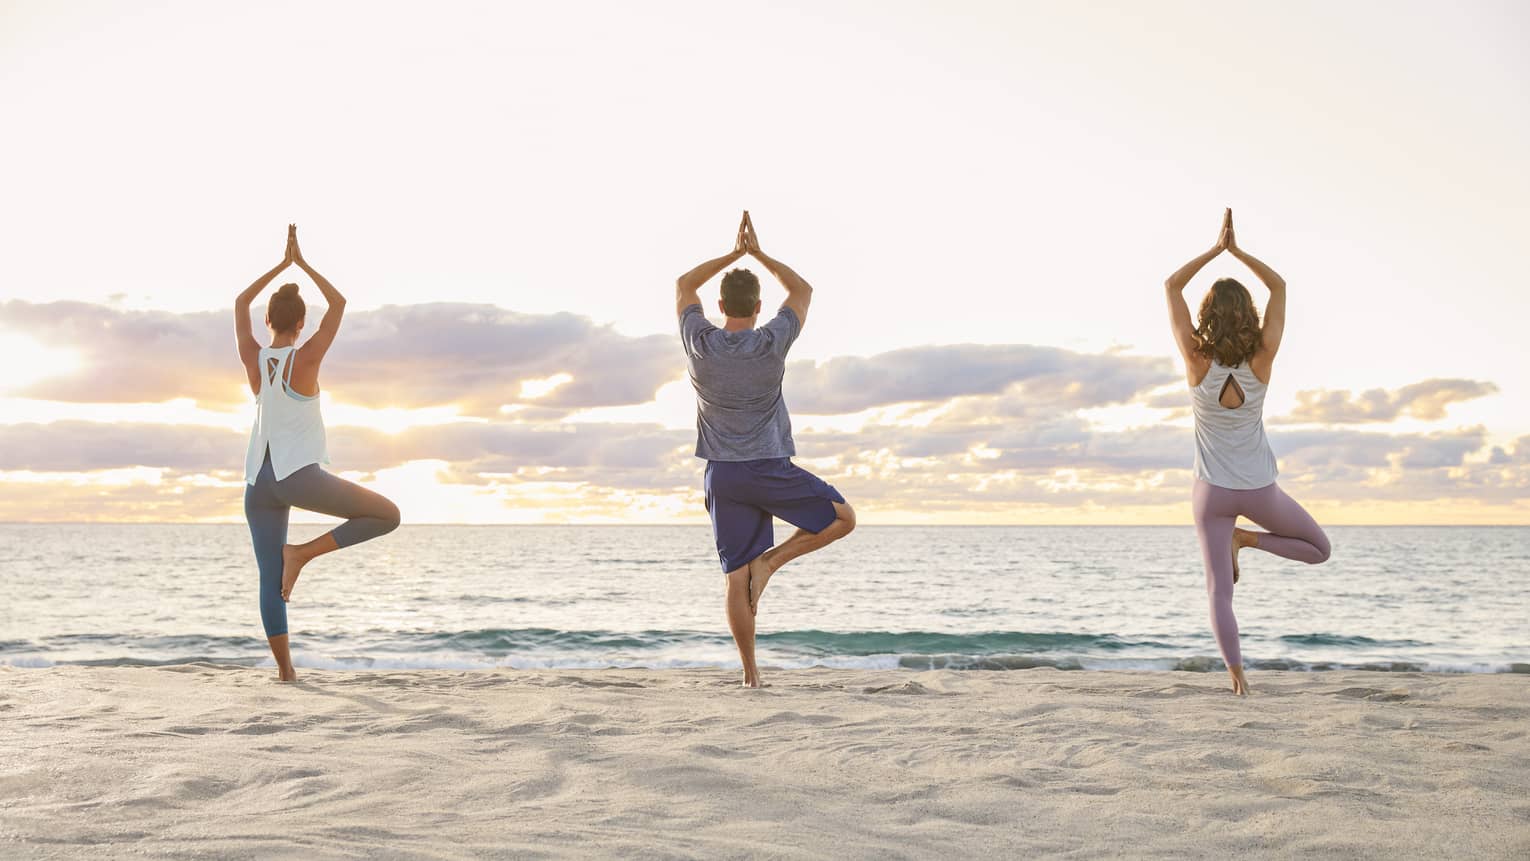 Backs of three people standing in yoga pose on sand beach at sunrise